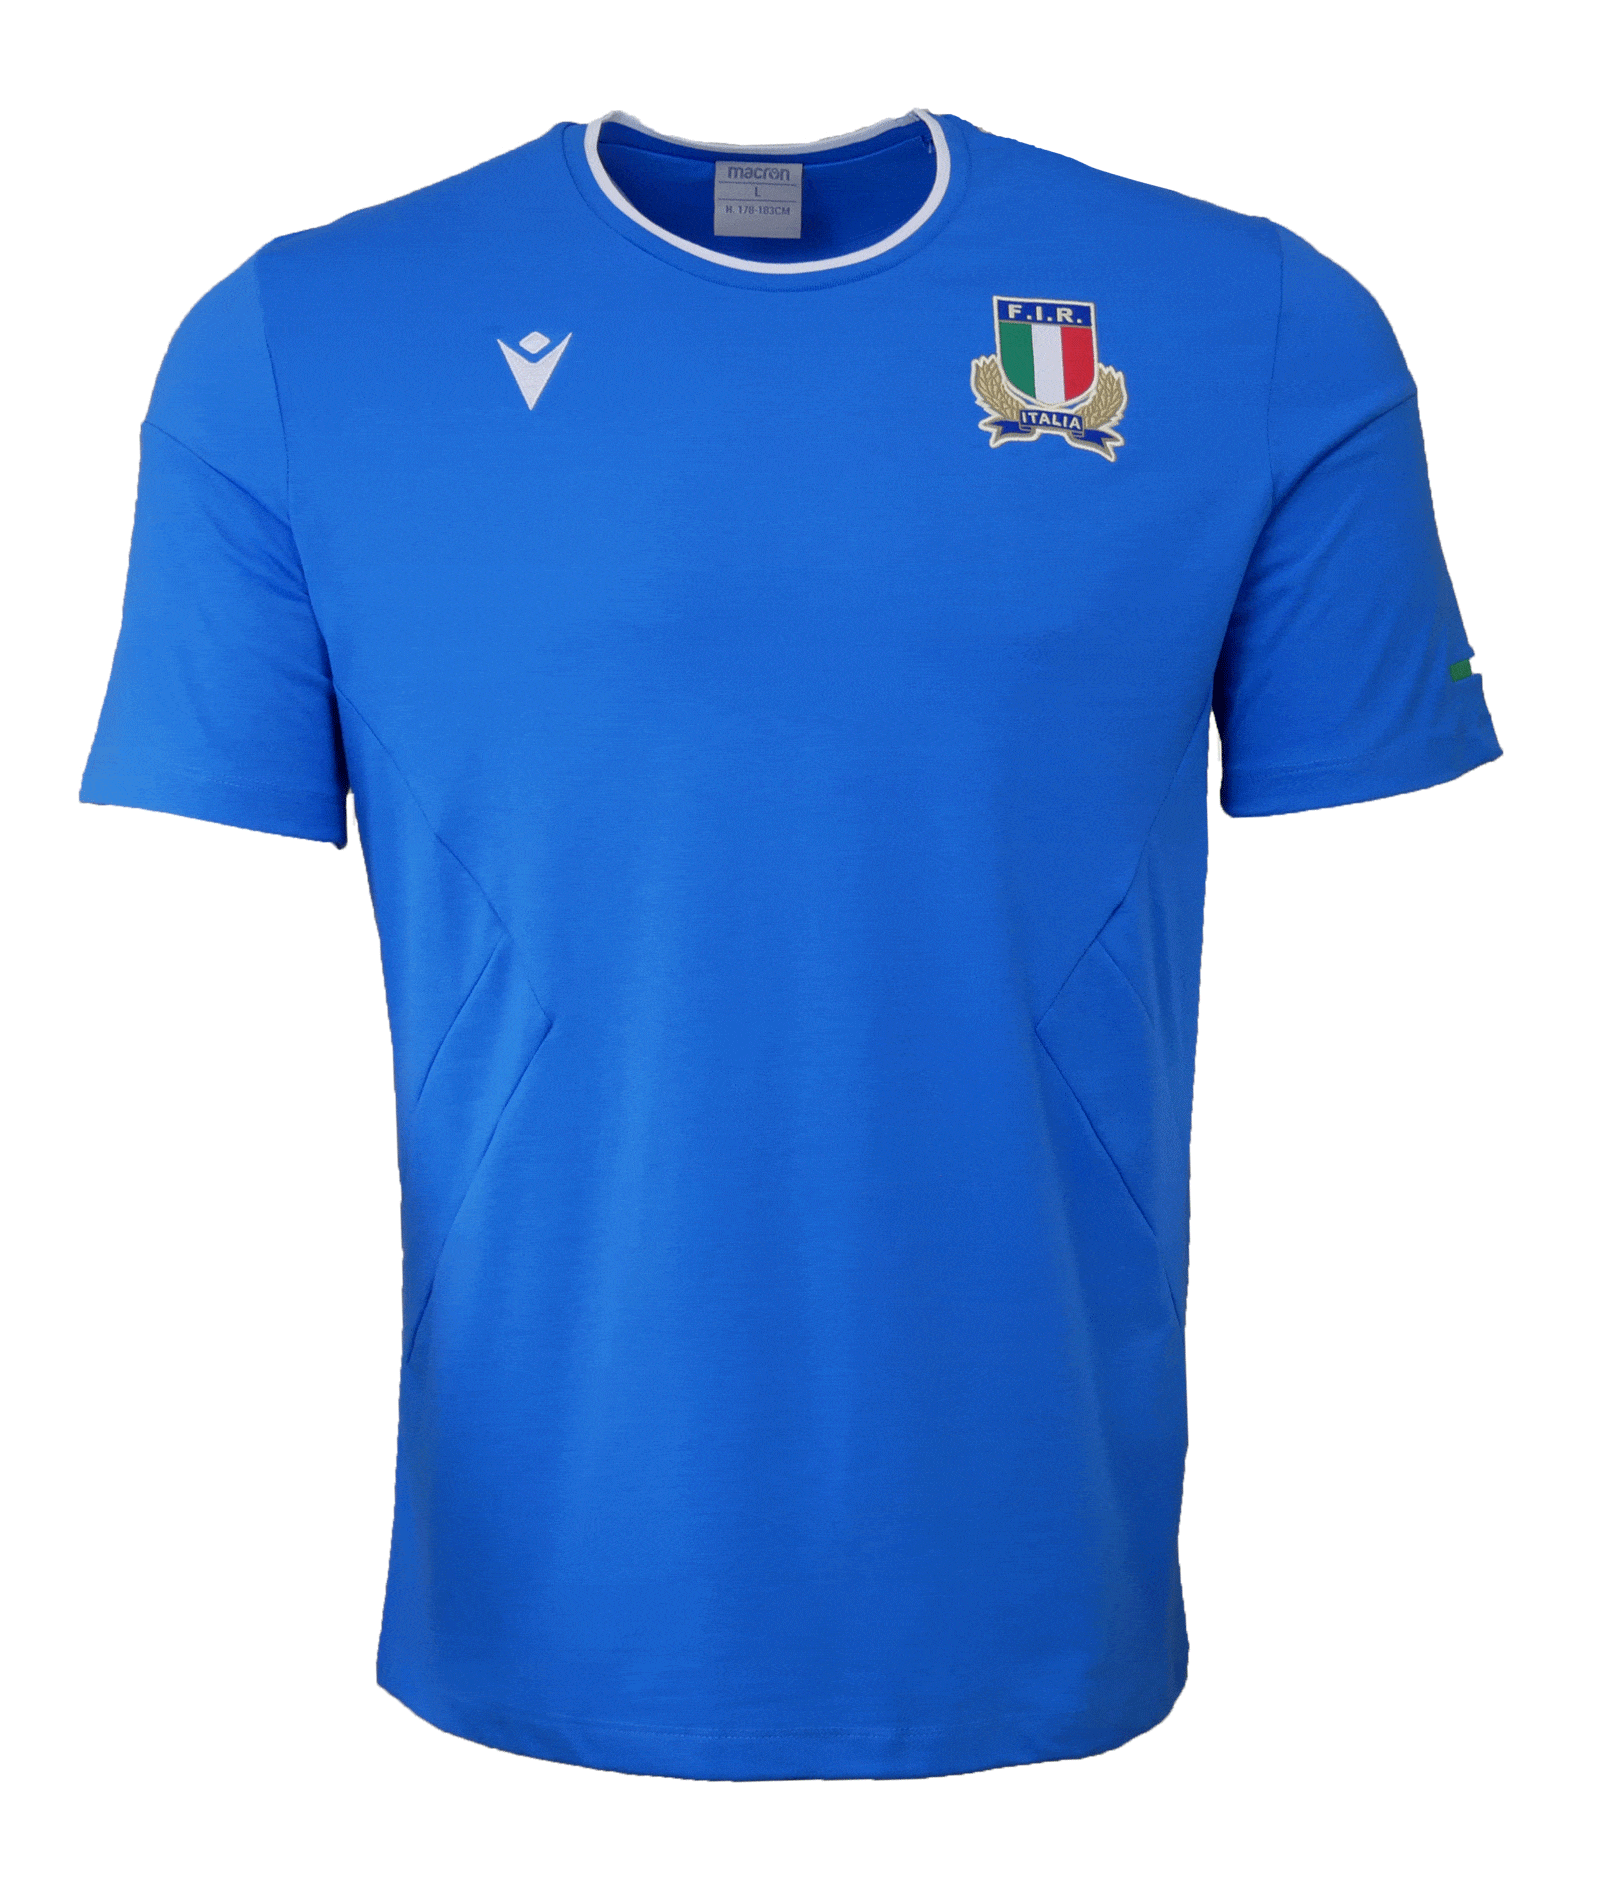 Italy FIR Rugby Travel T-Shirt 22/23 by Macron